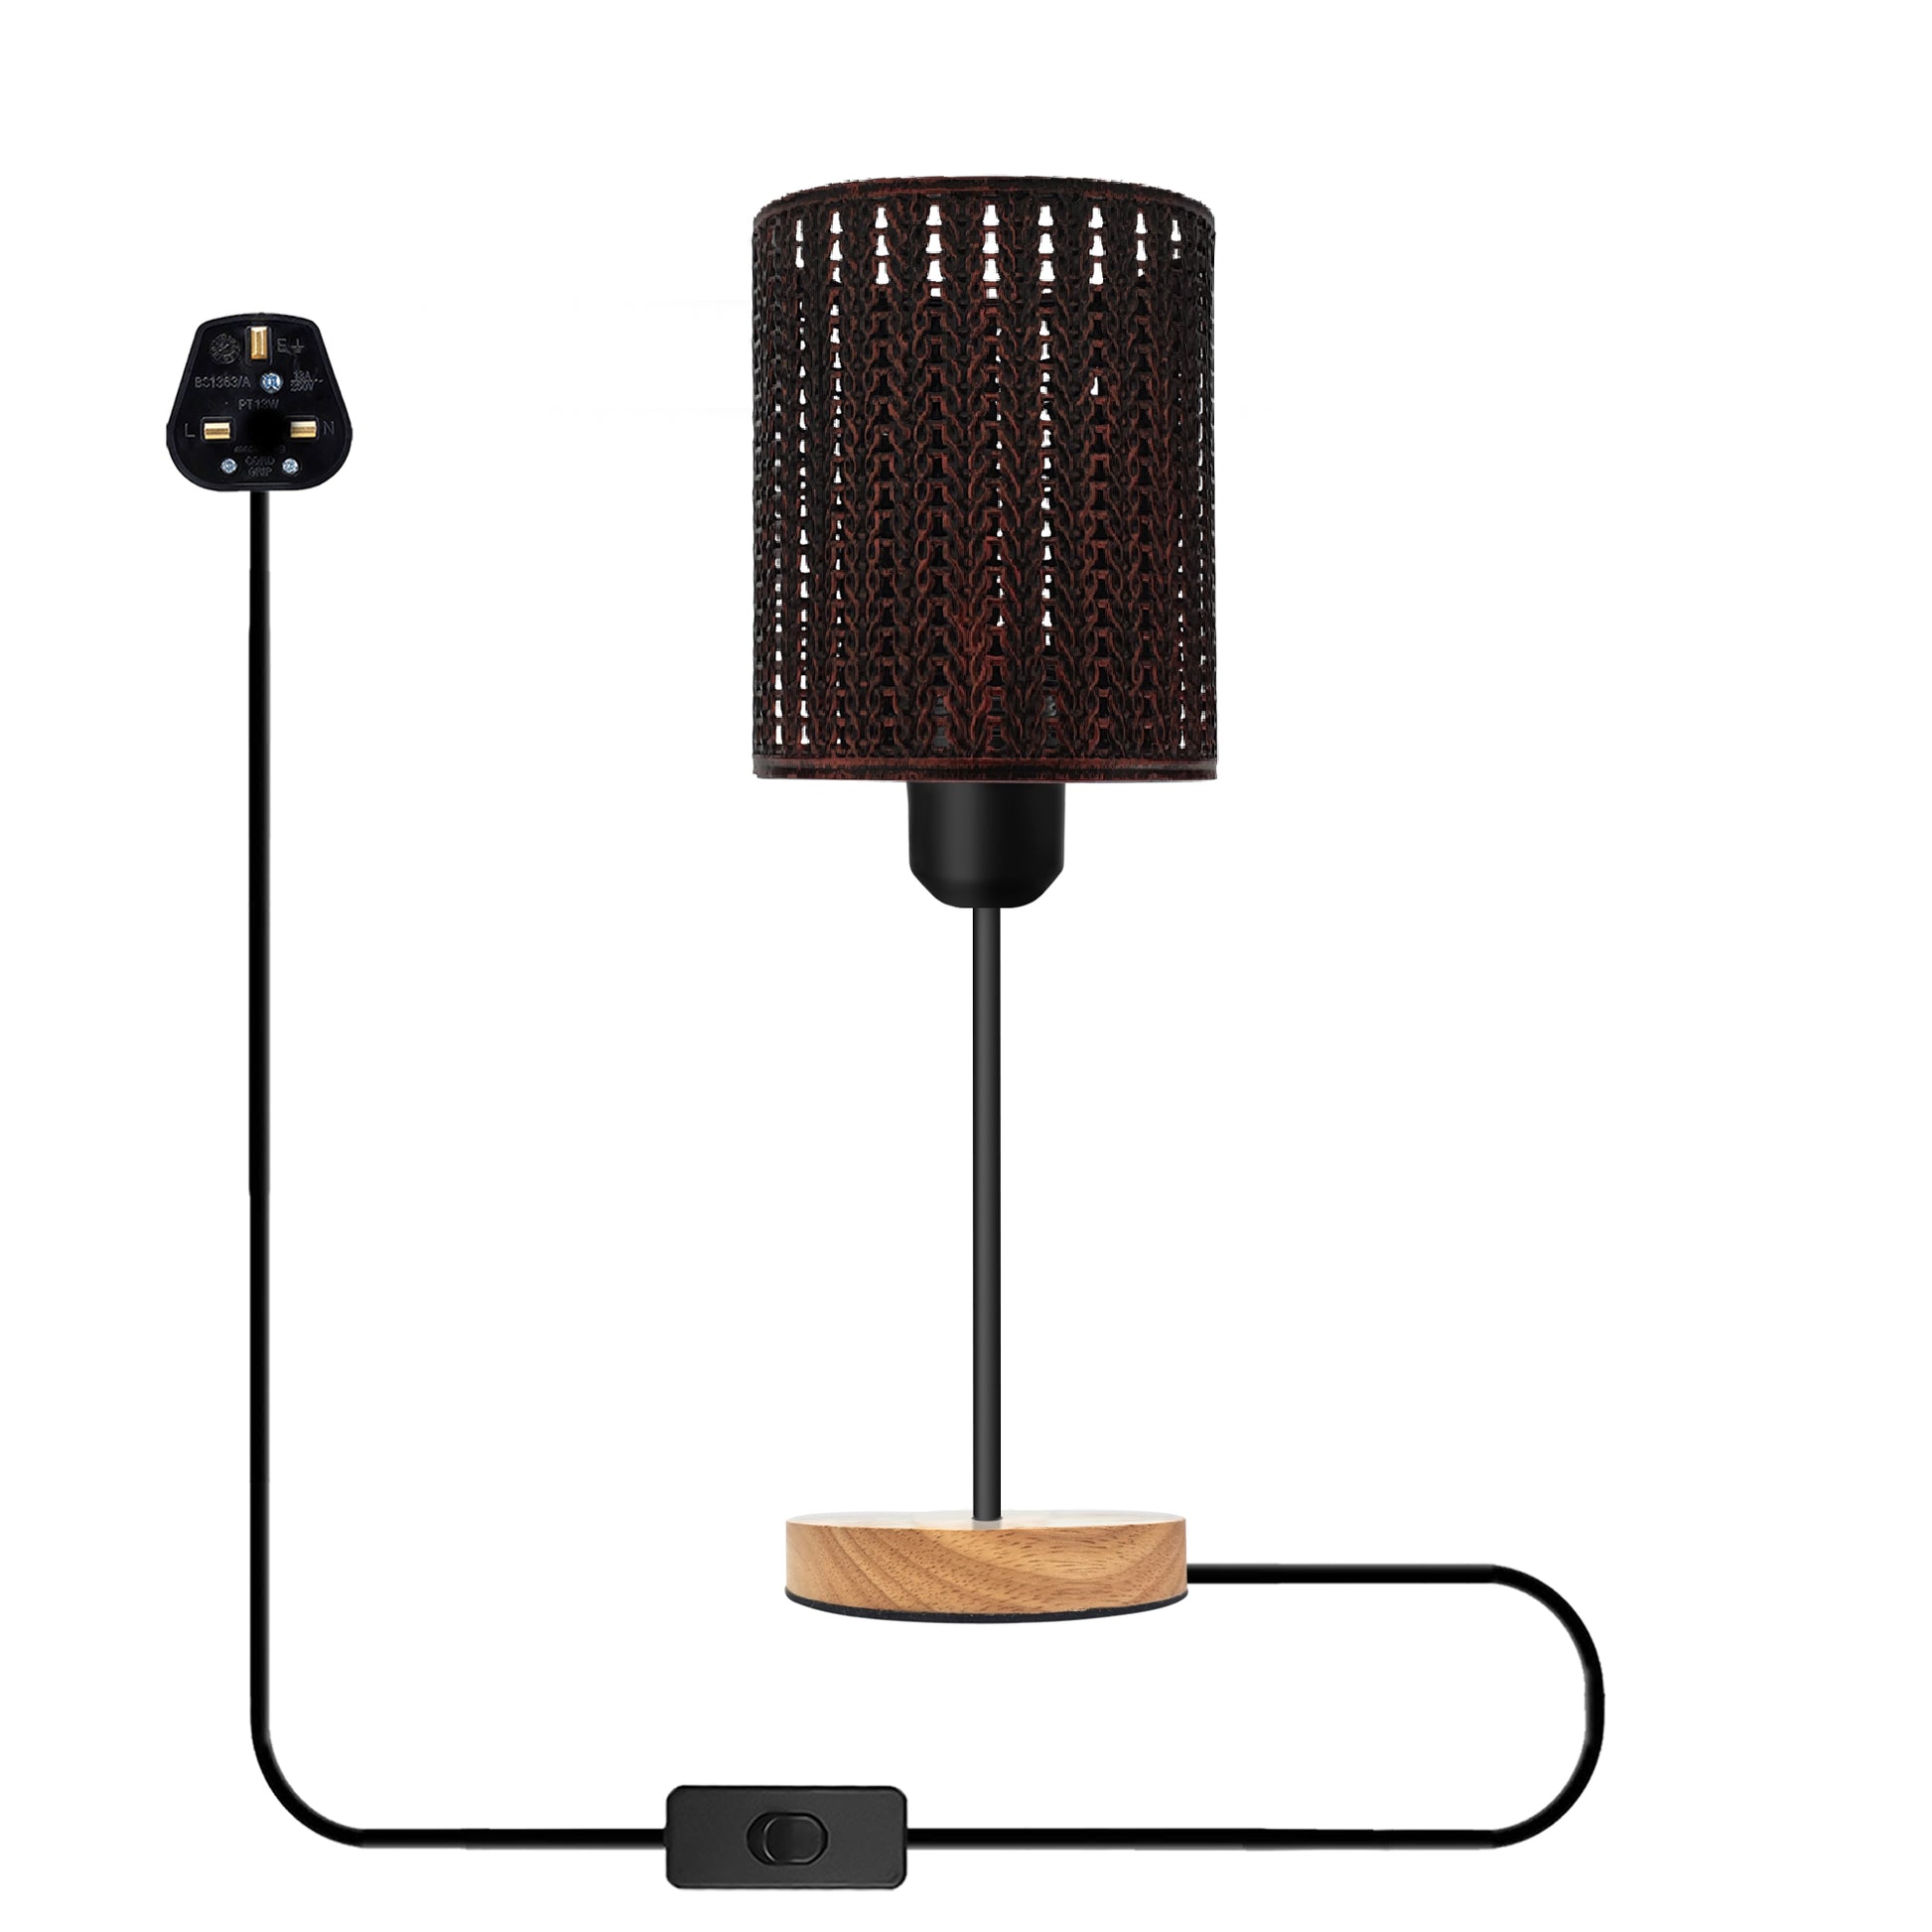 Wood stand Plug in Table Lamp For Desk